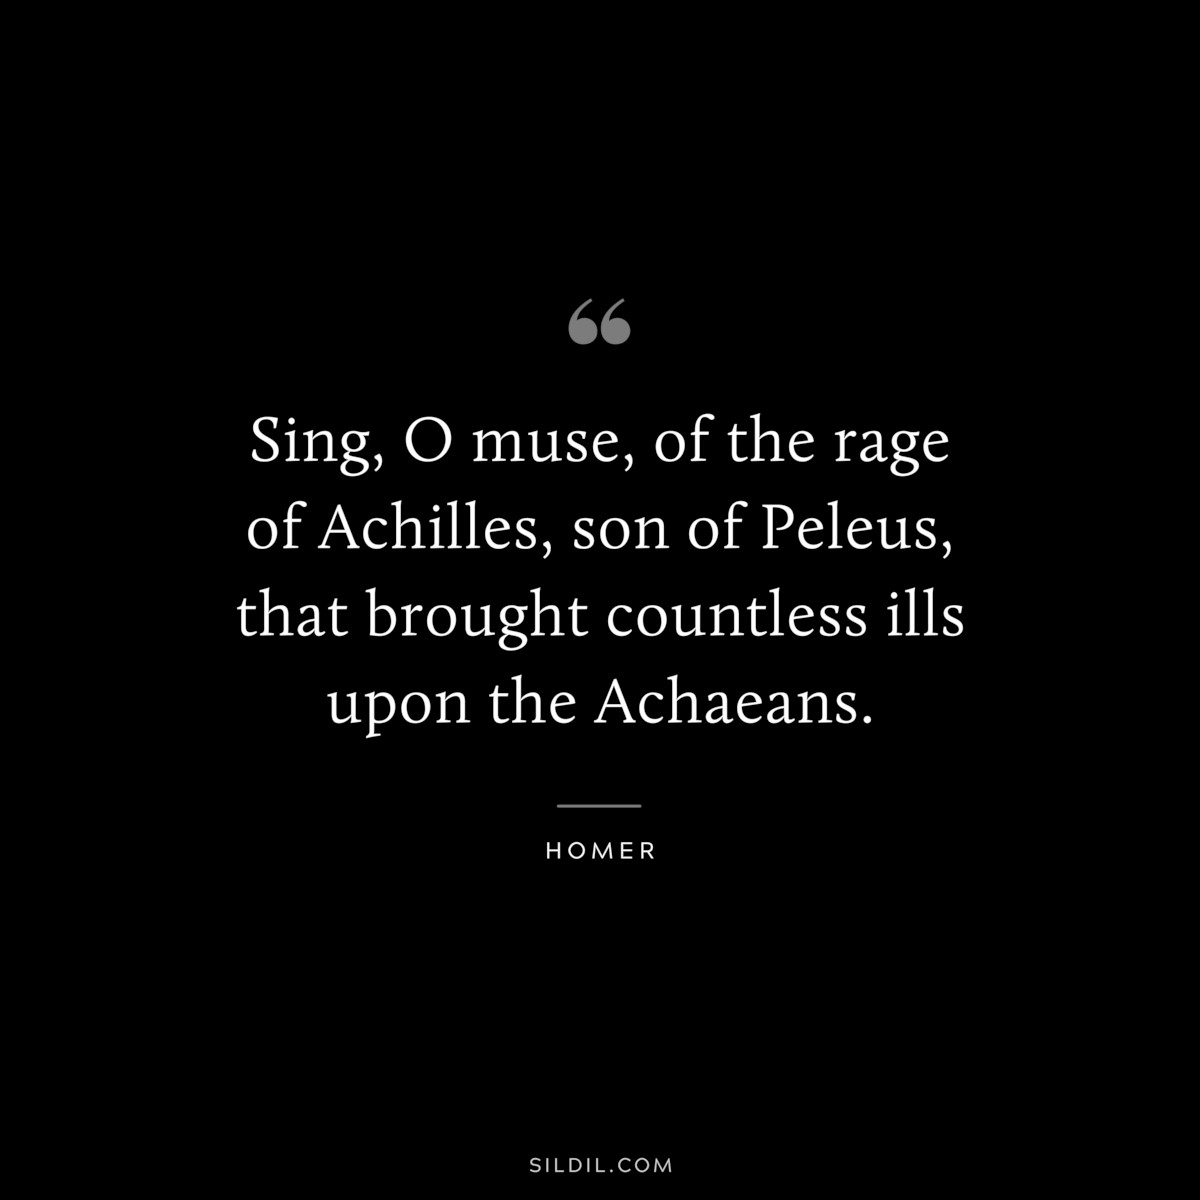 Sing, O muse, of the rage of Achilles, son of Peleus, that brought countless ills upon the Achaeans. ― Homer